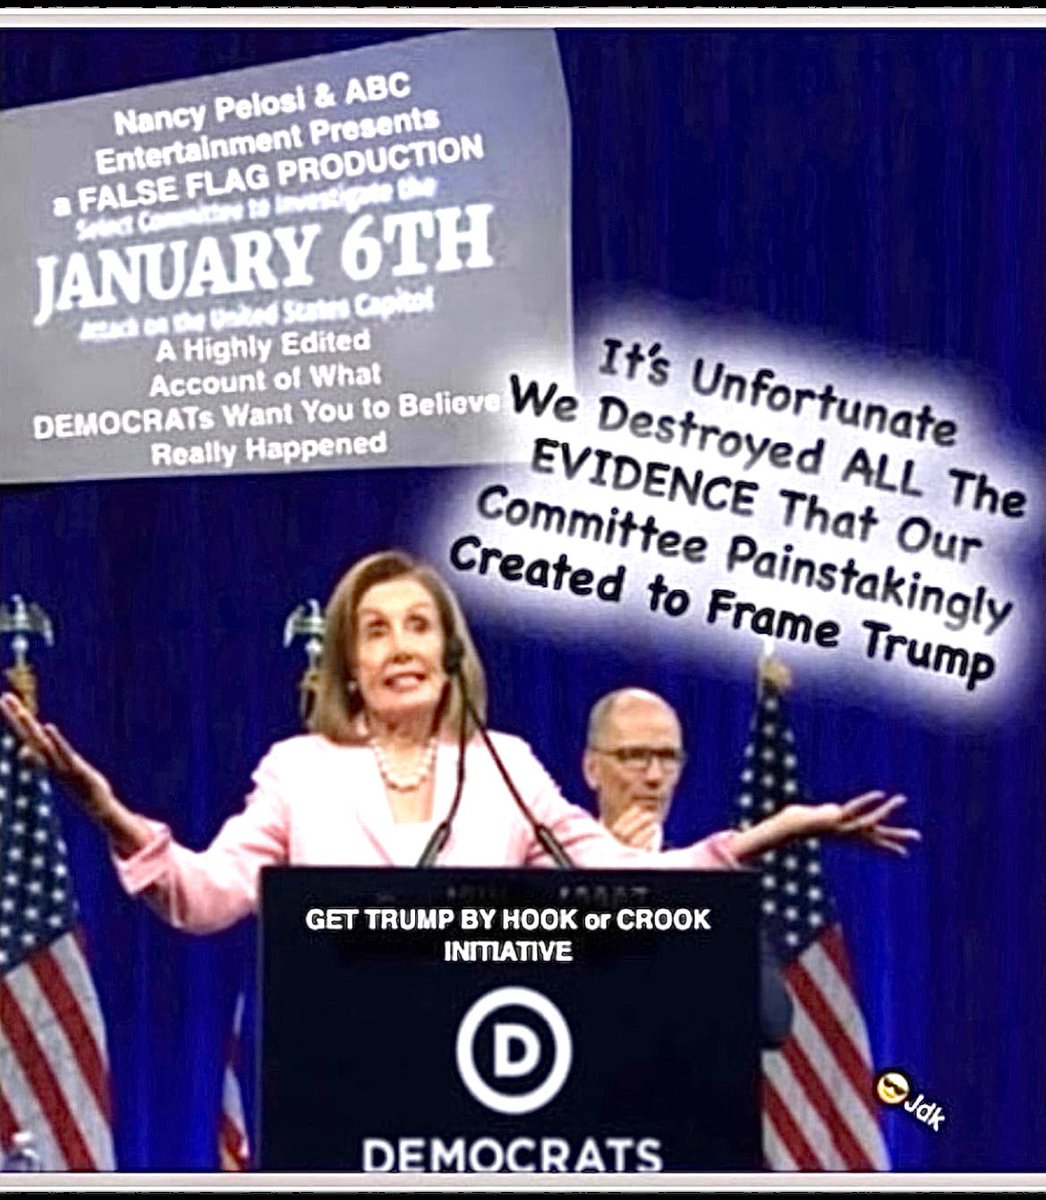 For Once and For All, THERE WAS NO INSURRECTION! J-6 Was a PELOSI FALSE FLAG PRODUCTION! The “STAR CHAMBER” Committee Forum Is 3rd WORLD Textbook Tactics, Where Accusations Are Proof Enough! TRUMP Can Not Be Removed For Something the DEMOCRATS CREATED! Jdk